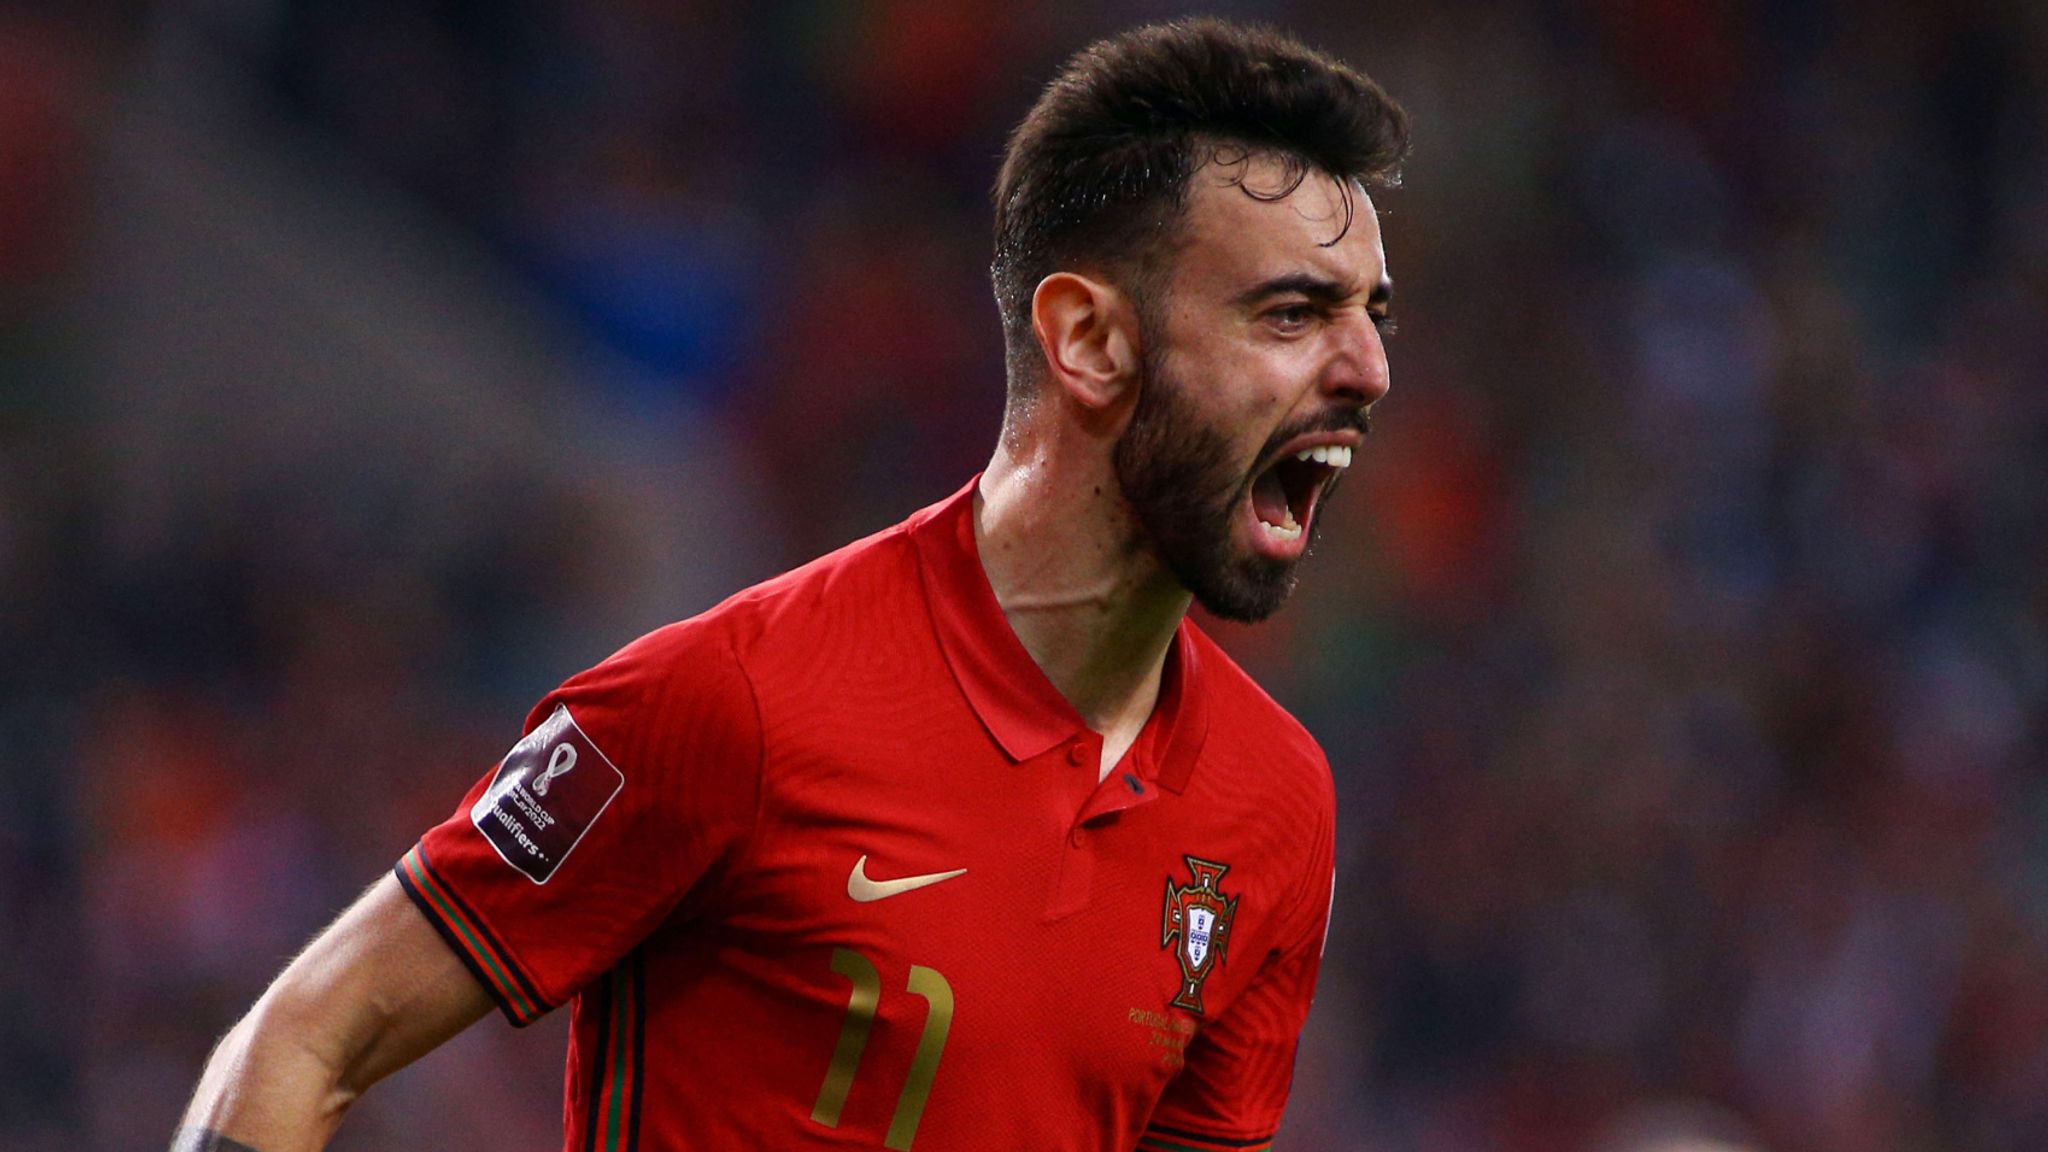 Bruno Fernandes scores twice as Portugal seal their place at World Cup finals, while Poland join them in Qatar - Football News - Sky Sports